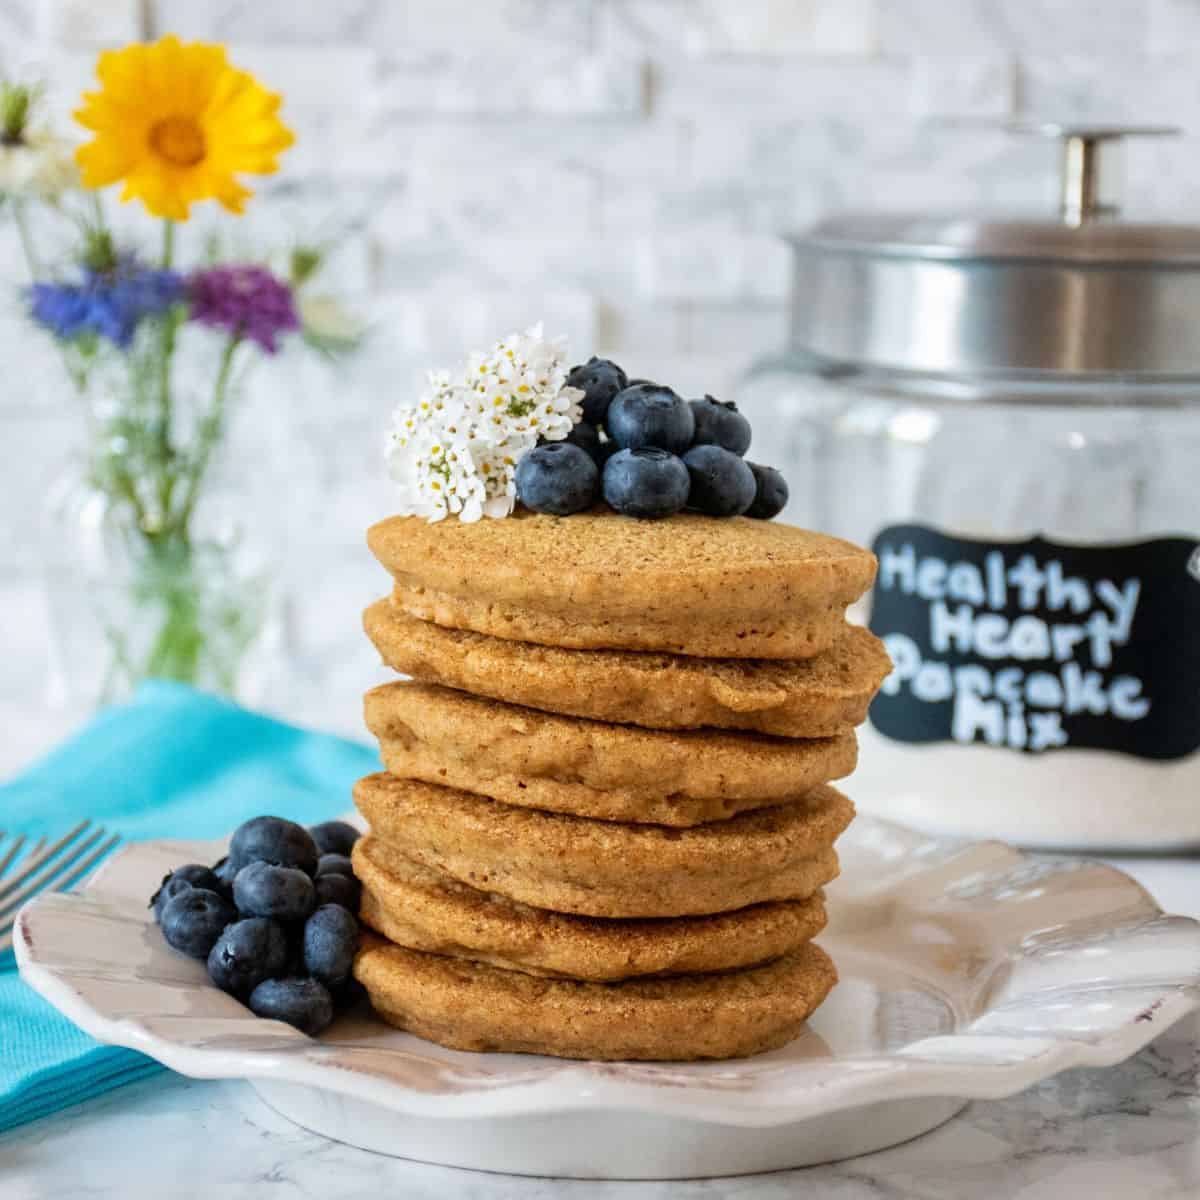 Stack of 6 whole wheat pancakes, with a pile of fresh blueberries on top, and piled to the right of the stack. Glass jar that reads 'healthy heart pancake mix' is visible in the background with a bouquet of wildflowers.